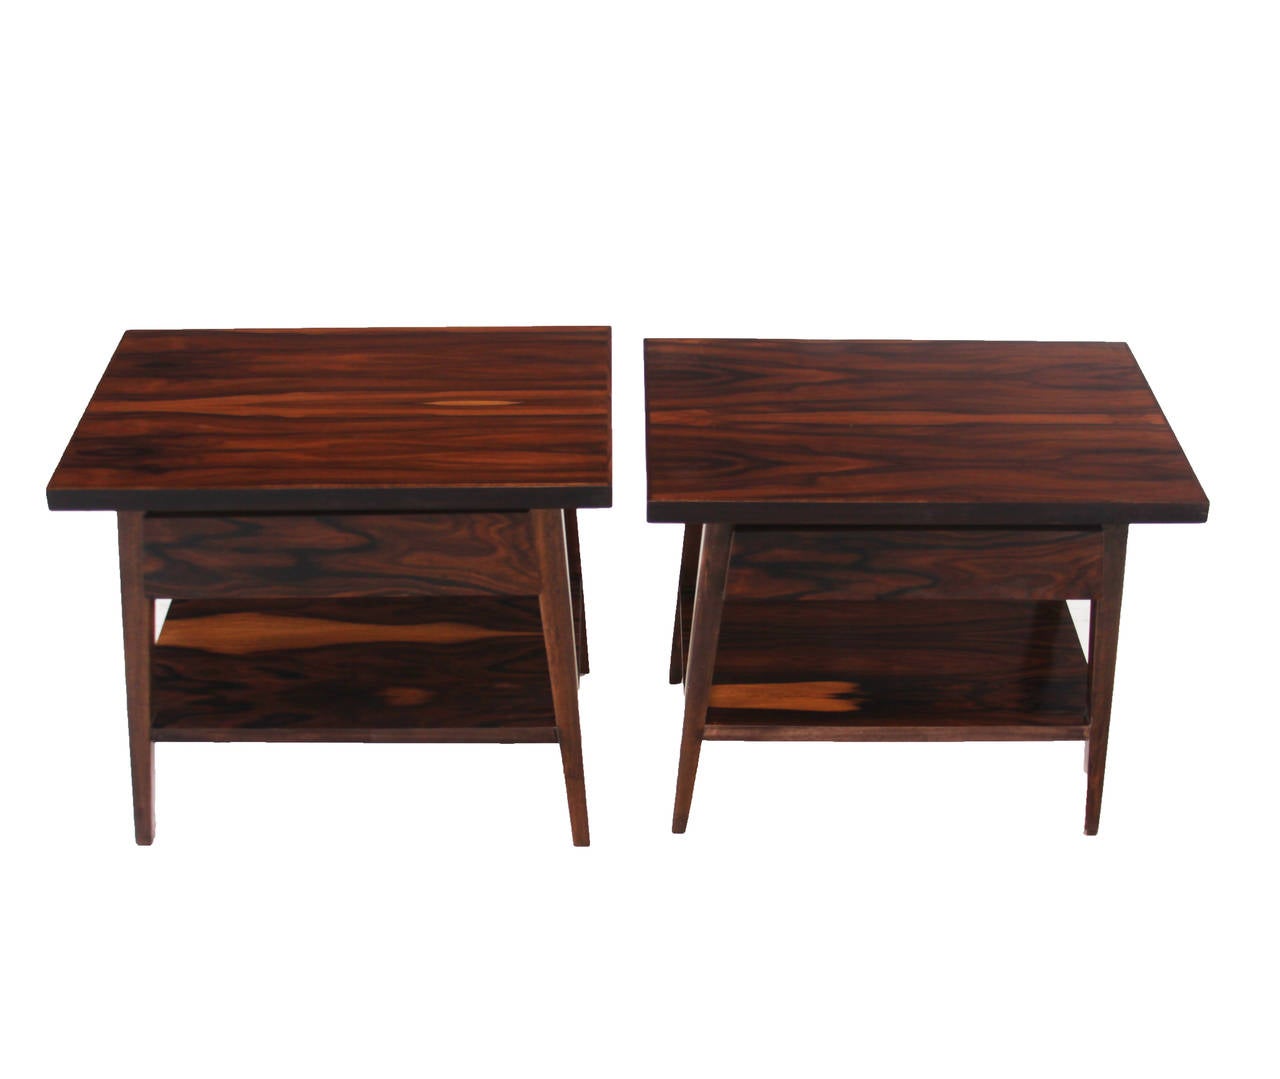 Pair of vintage Brazilian Rosewood night stands or side tables with a single drawer apiece and shelves on the bottom for additional storage. 

Many pieces are stored in our warehouse, so please click on CONTACT DEALER under our logo below to find